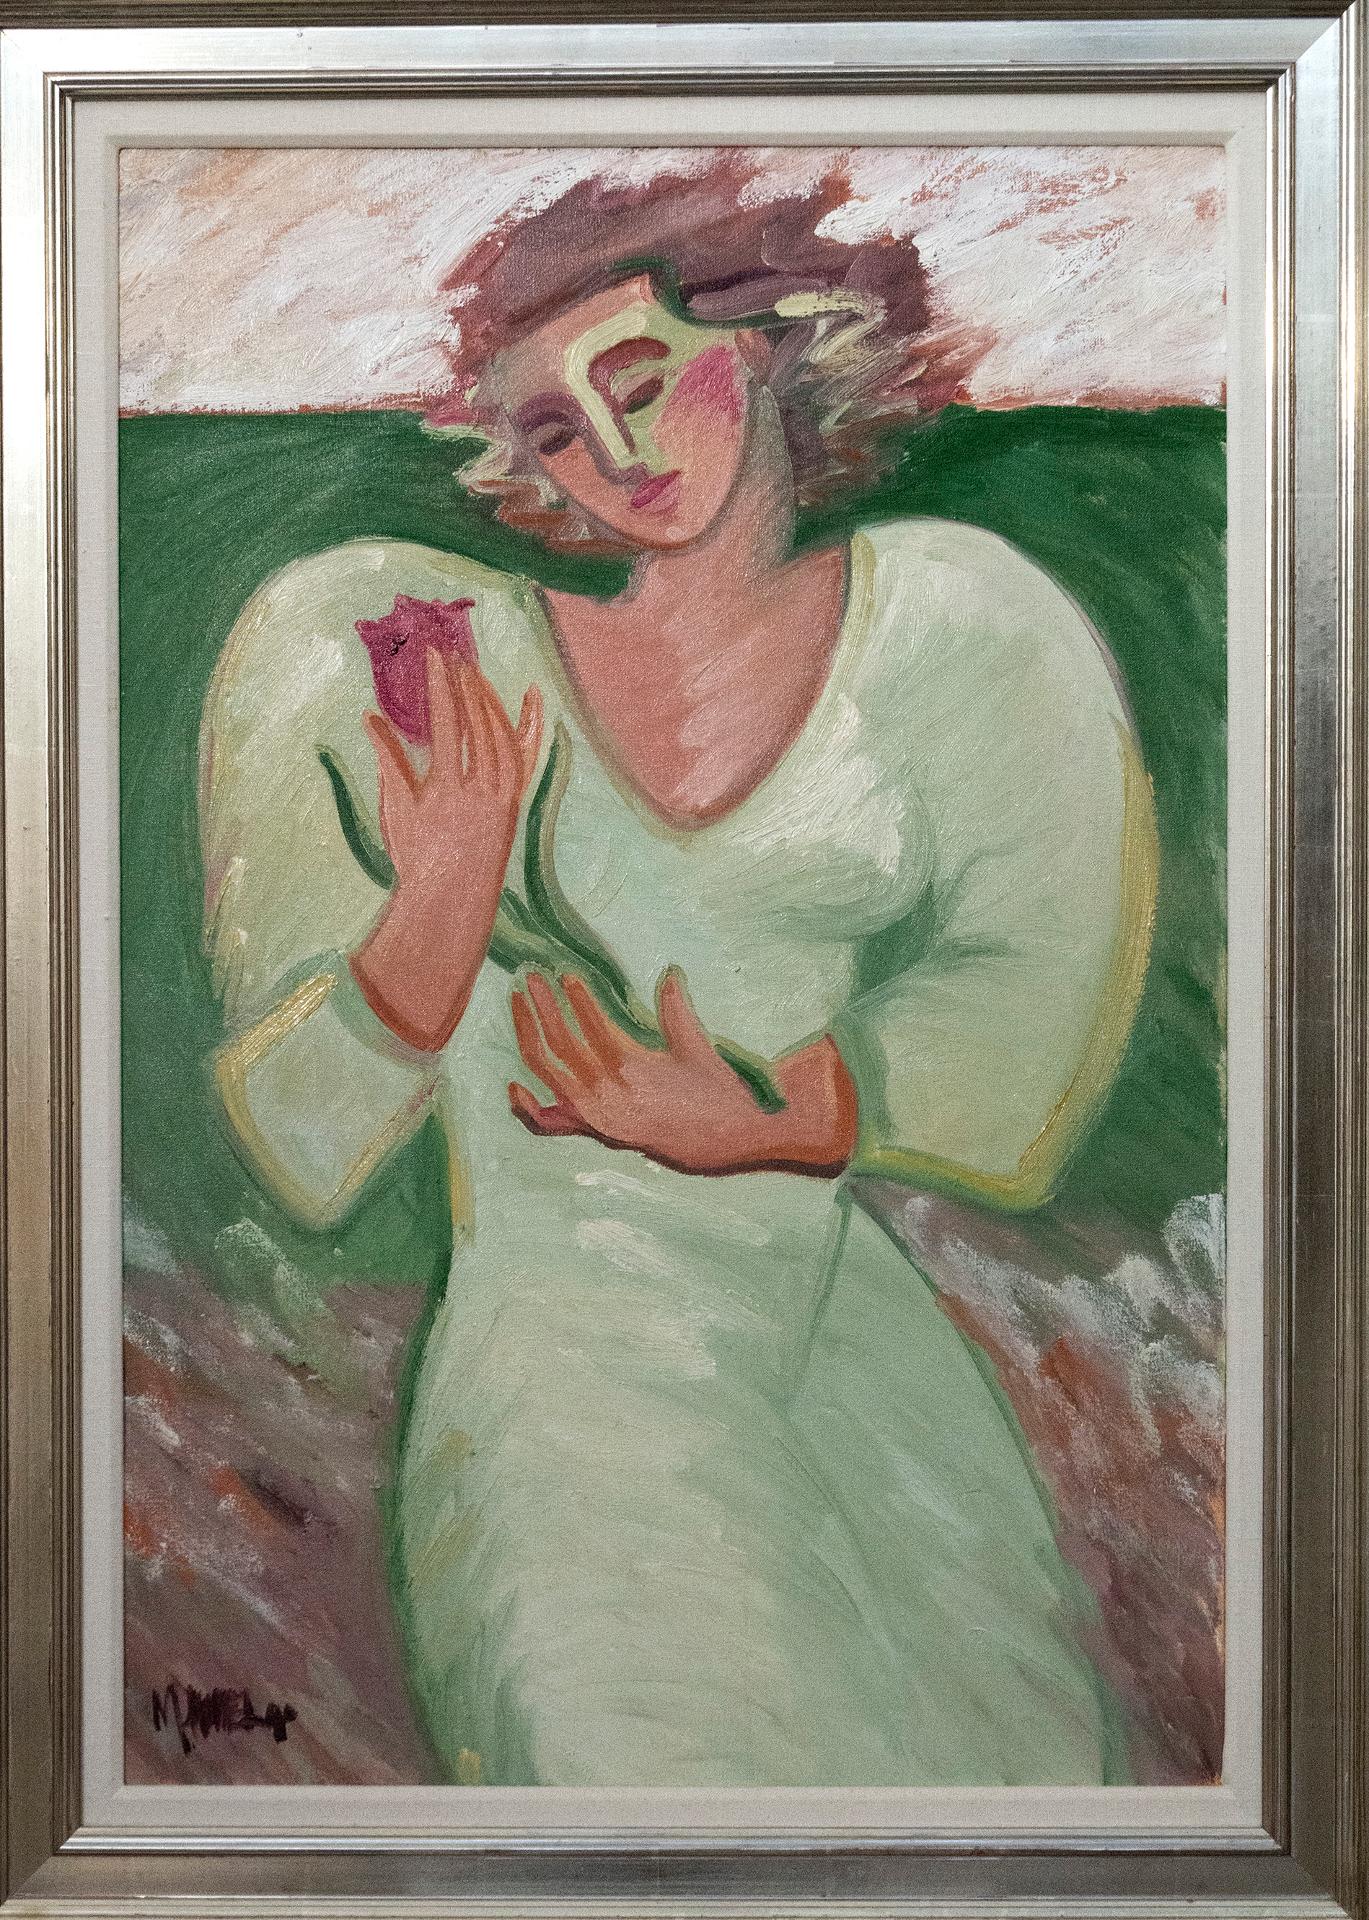 Marsha Hammel - Lady in Green with Red Rose, 1989